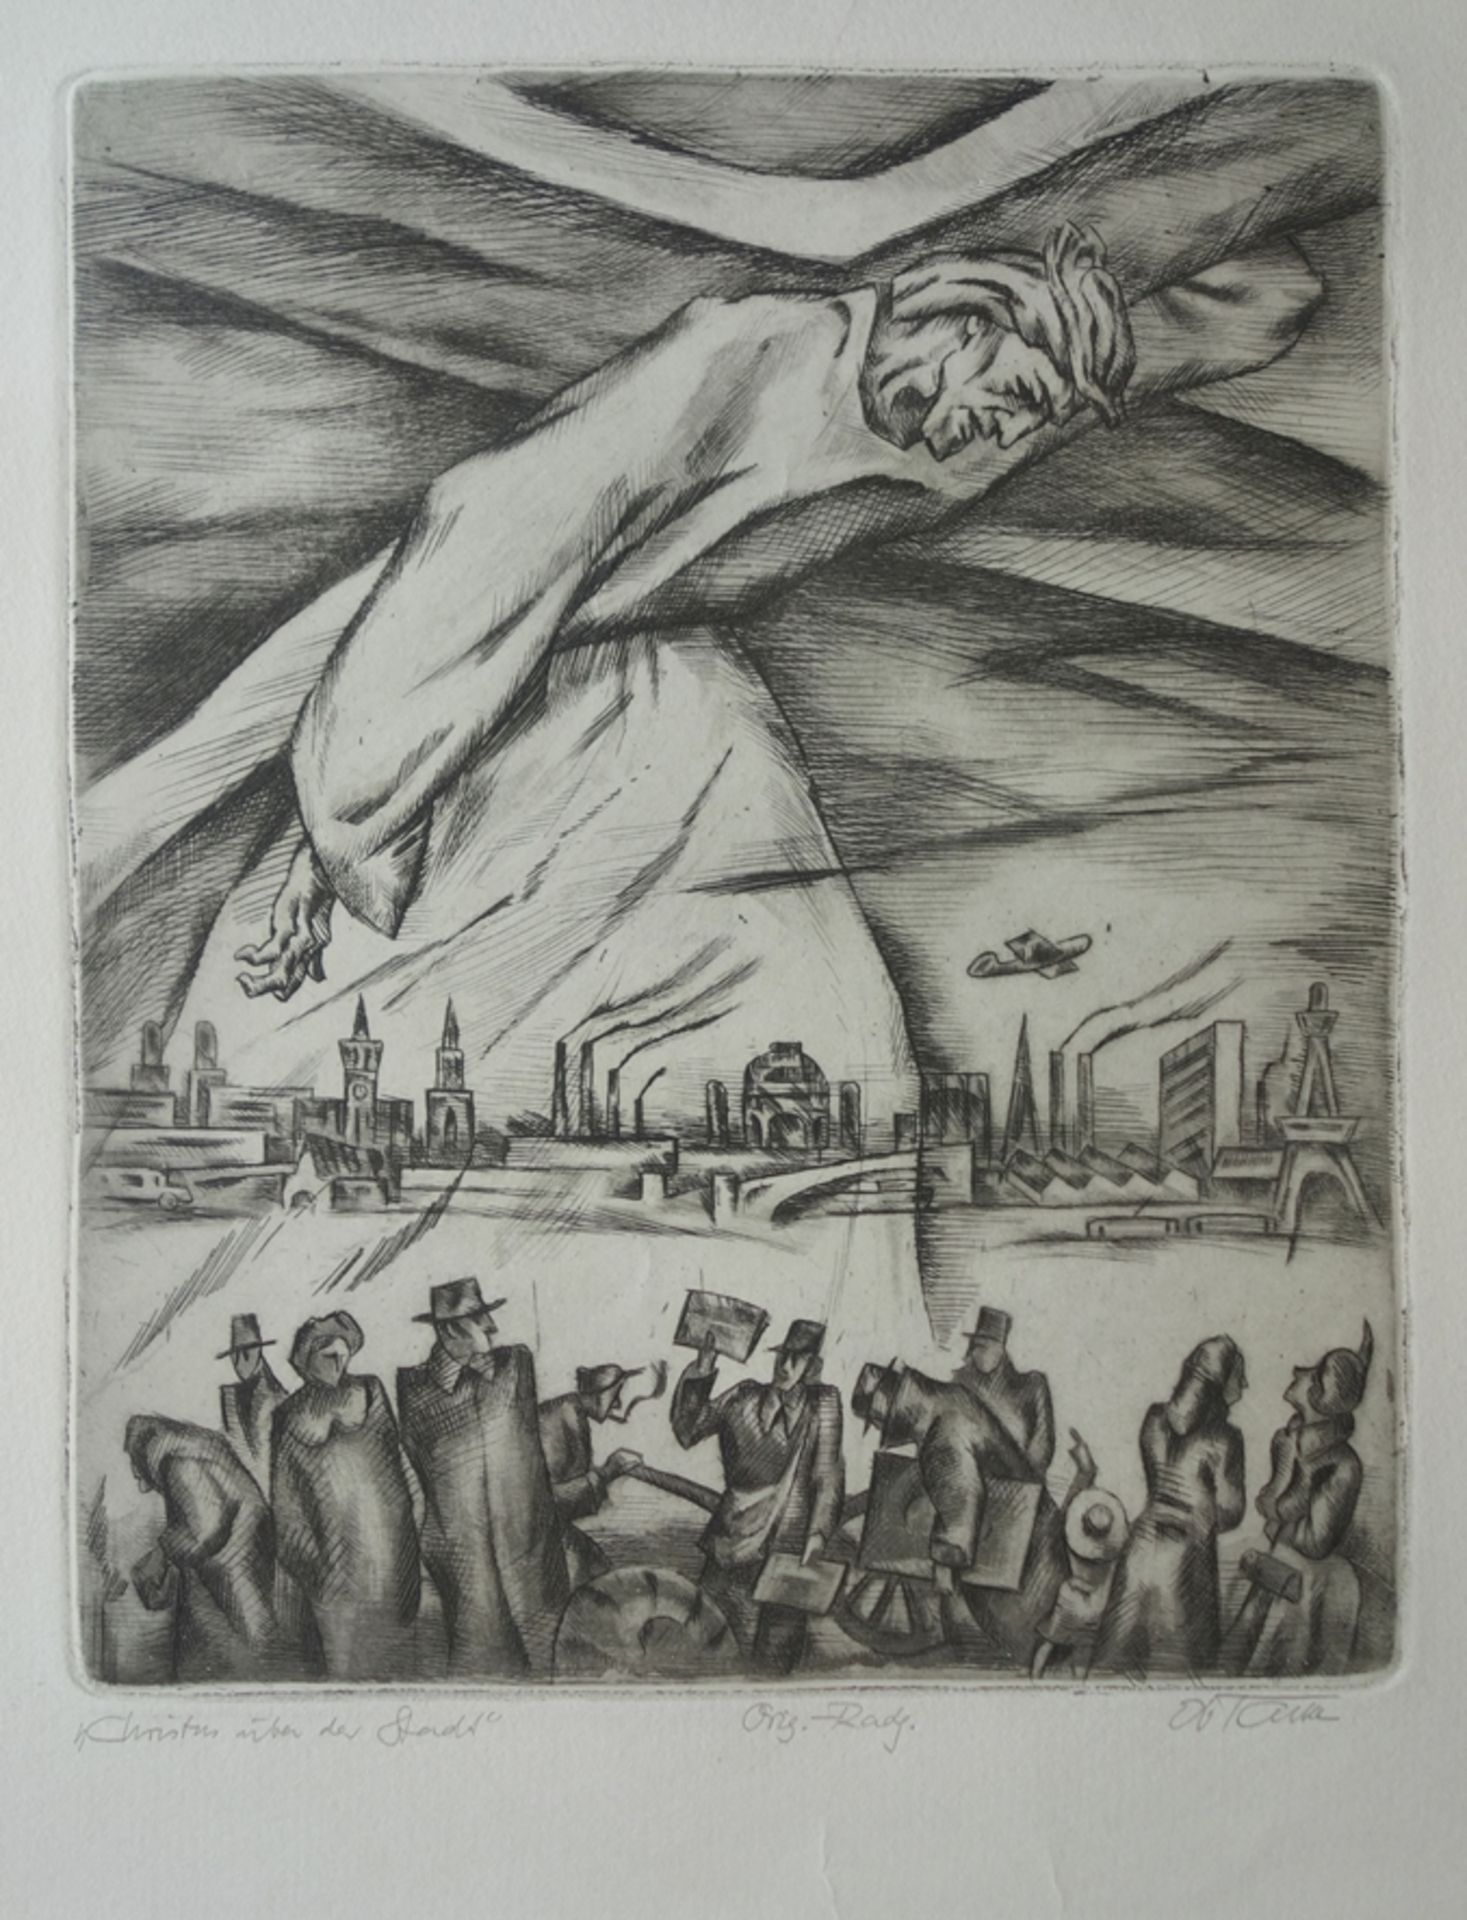 Eberhard Tacke (1903-1989), "Christ above the city", 1956, etching